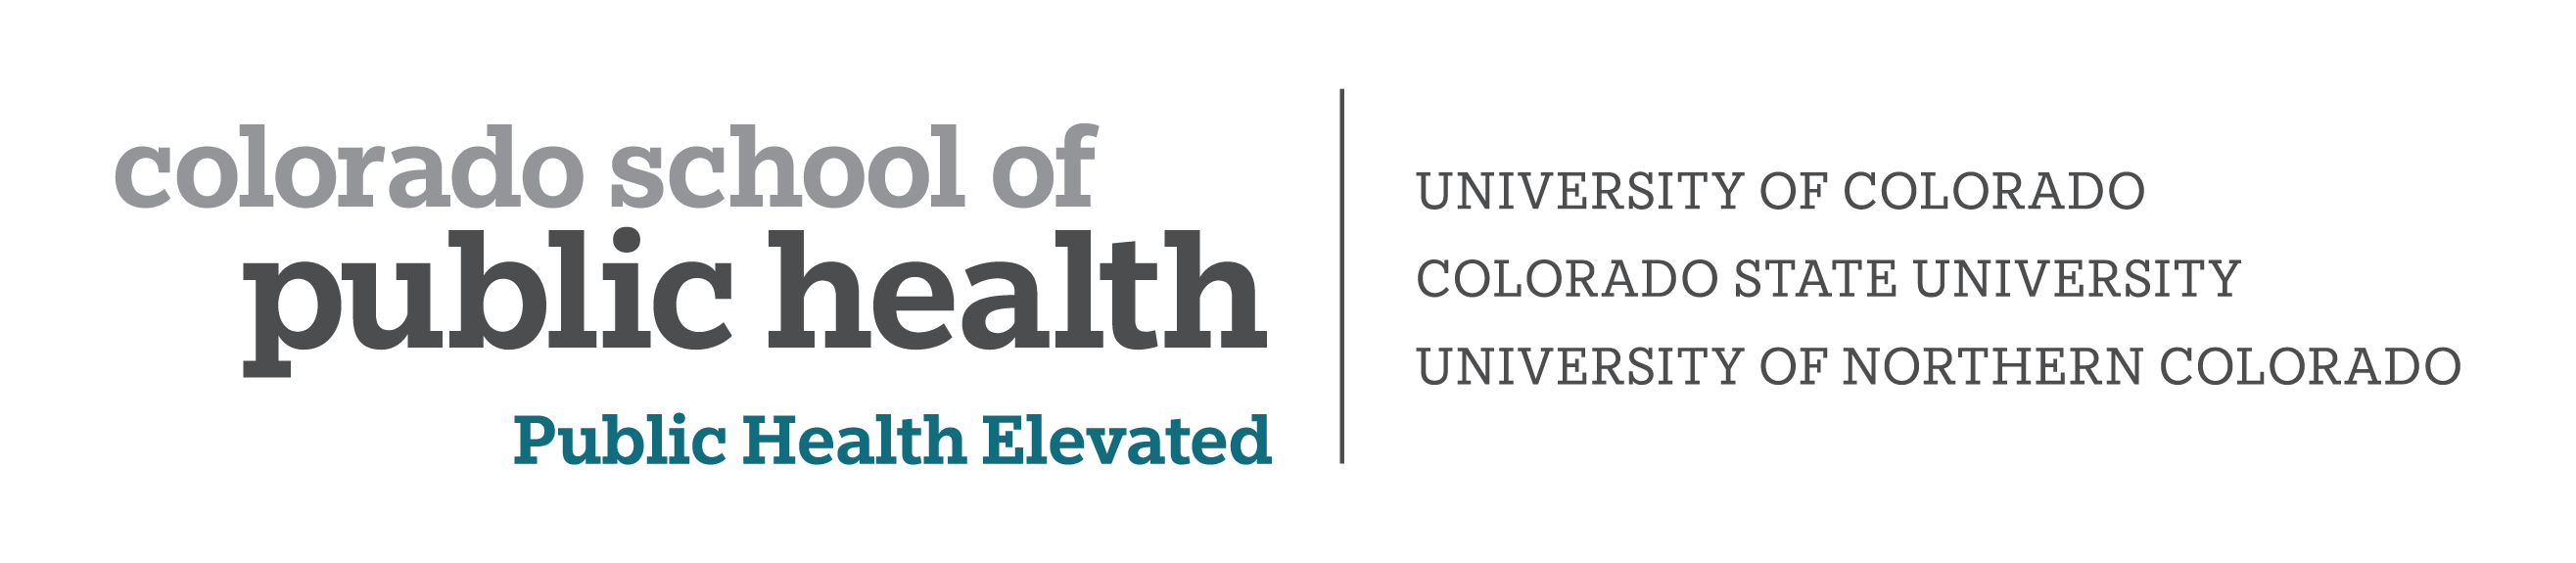 ColoradoSPH logo with blue font highlighting the new tag line "Public Health Elevated"